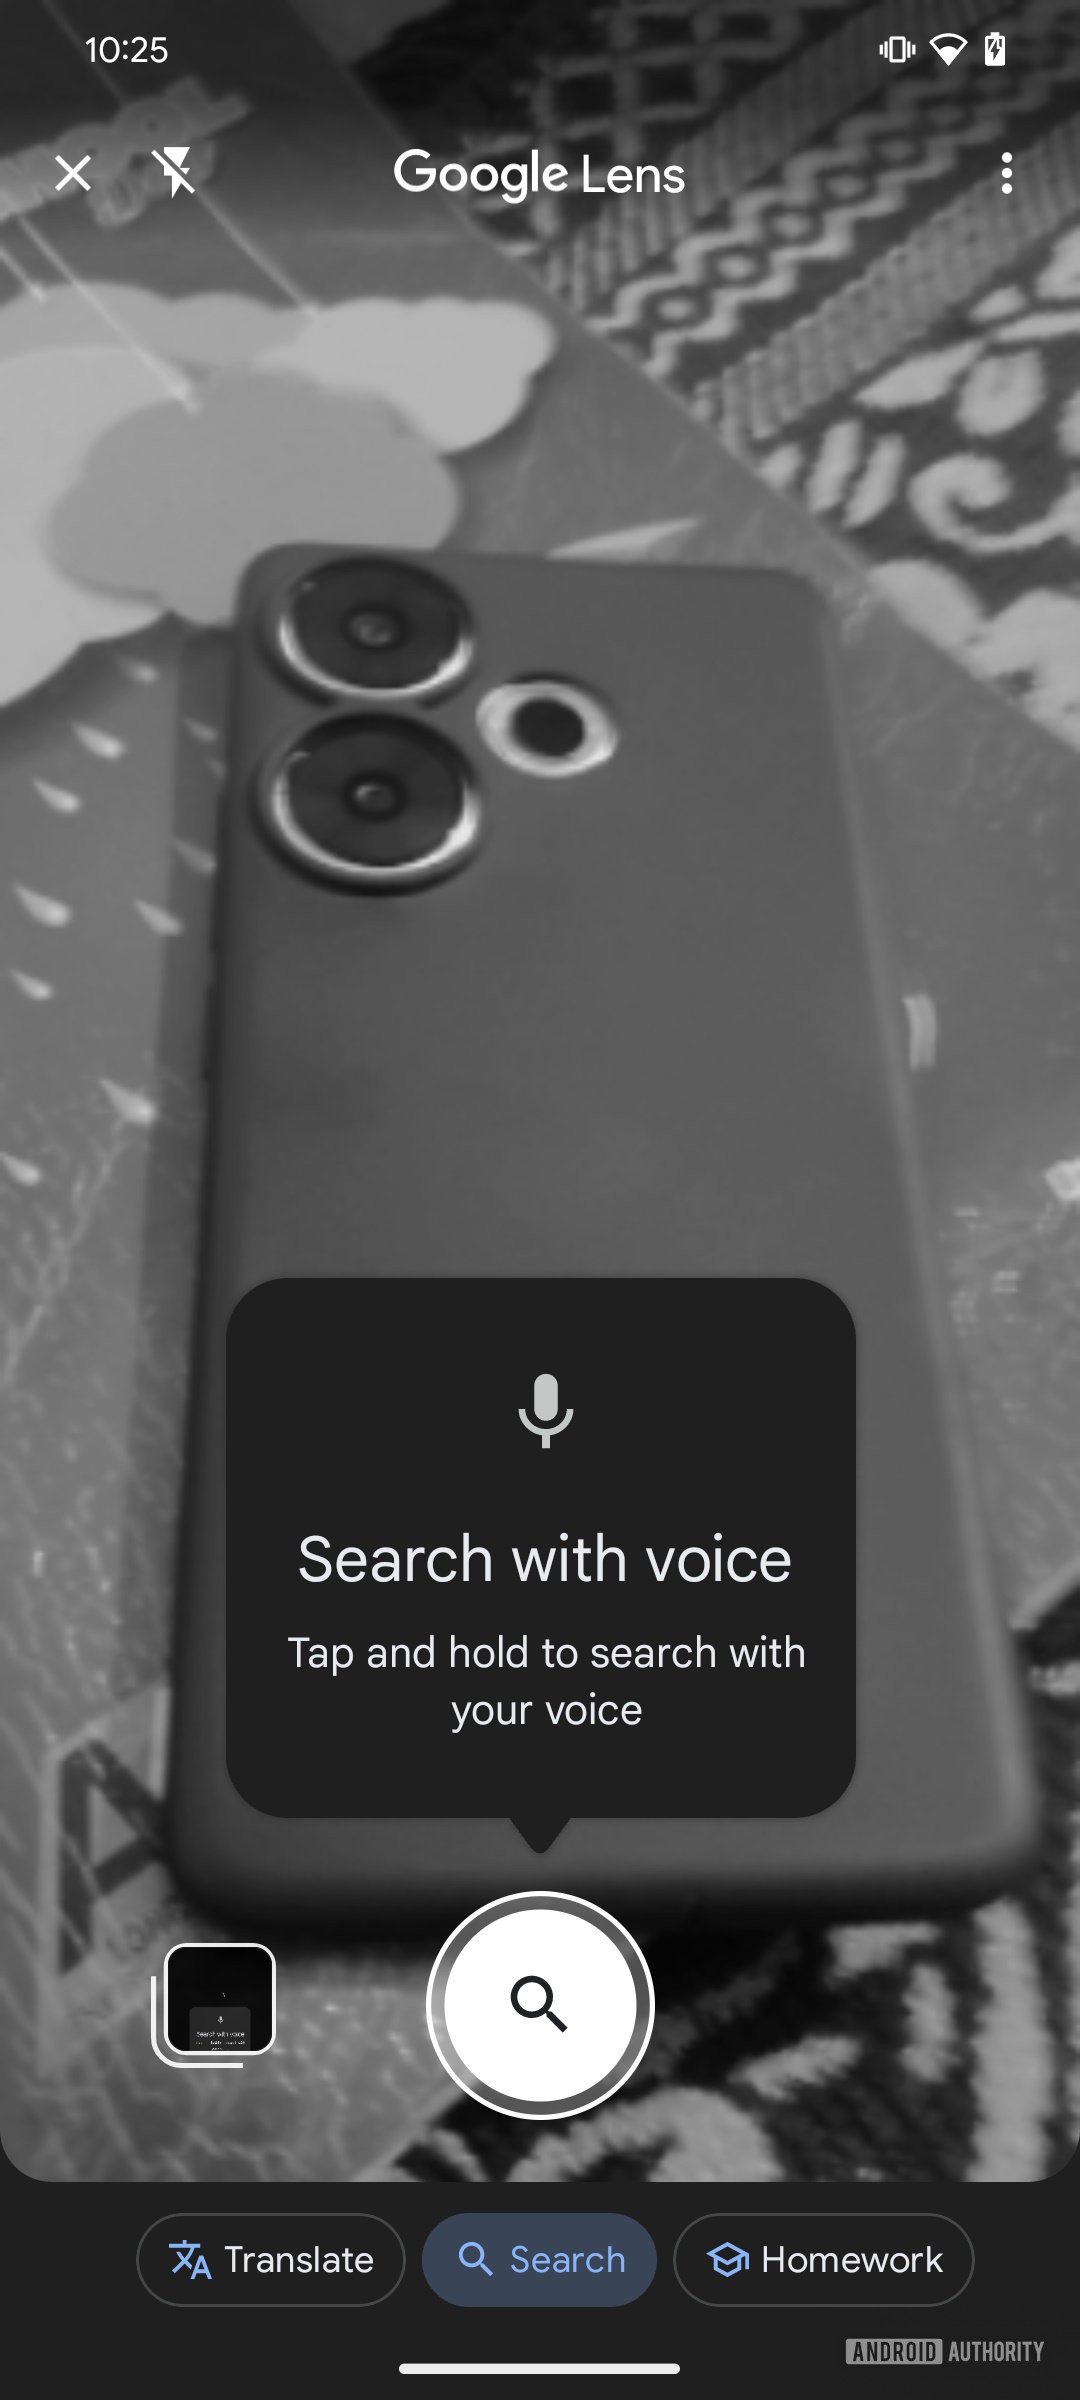 Google Lens Search with Voice